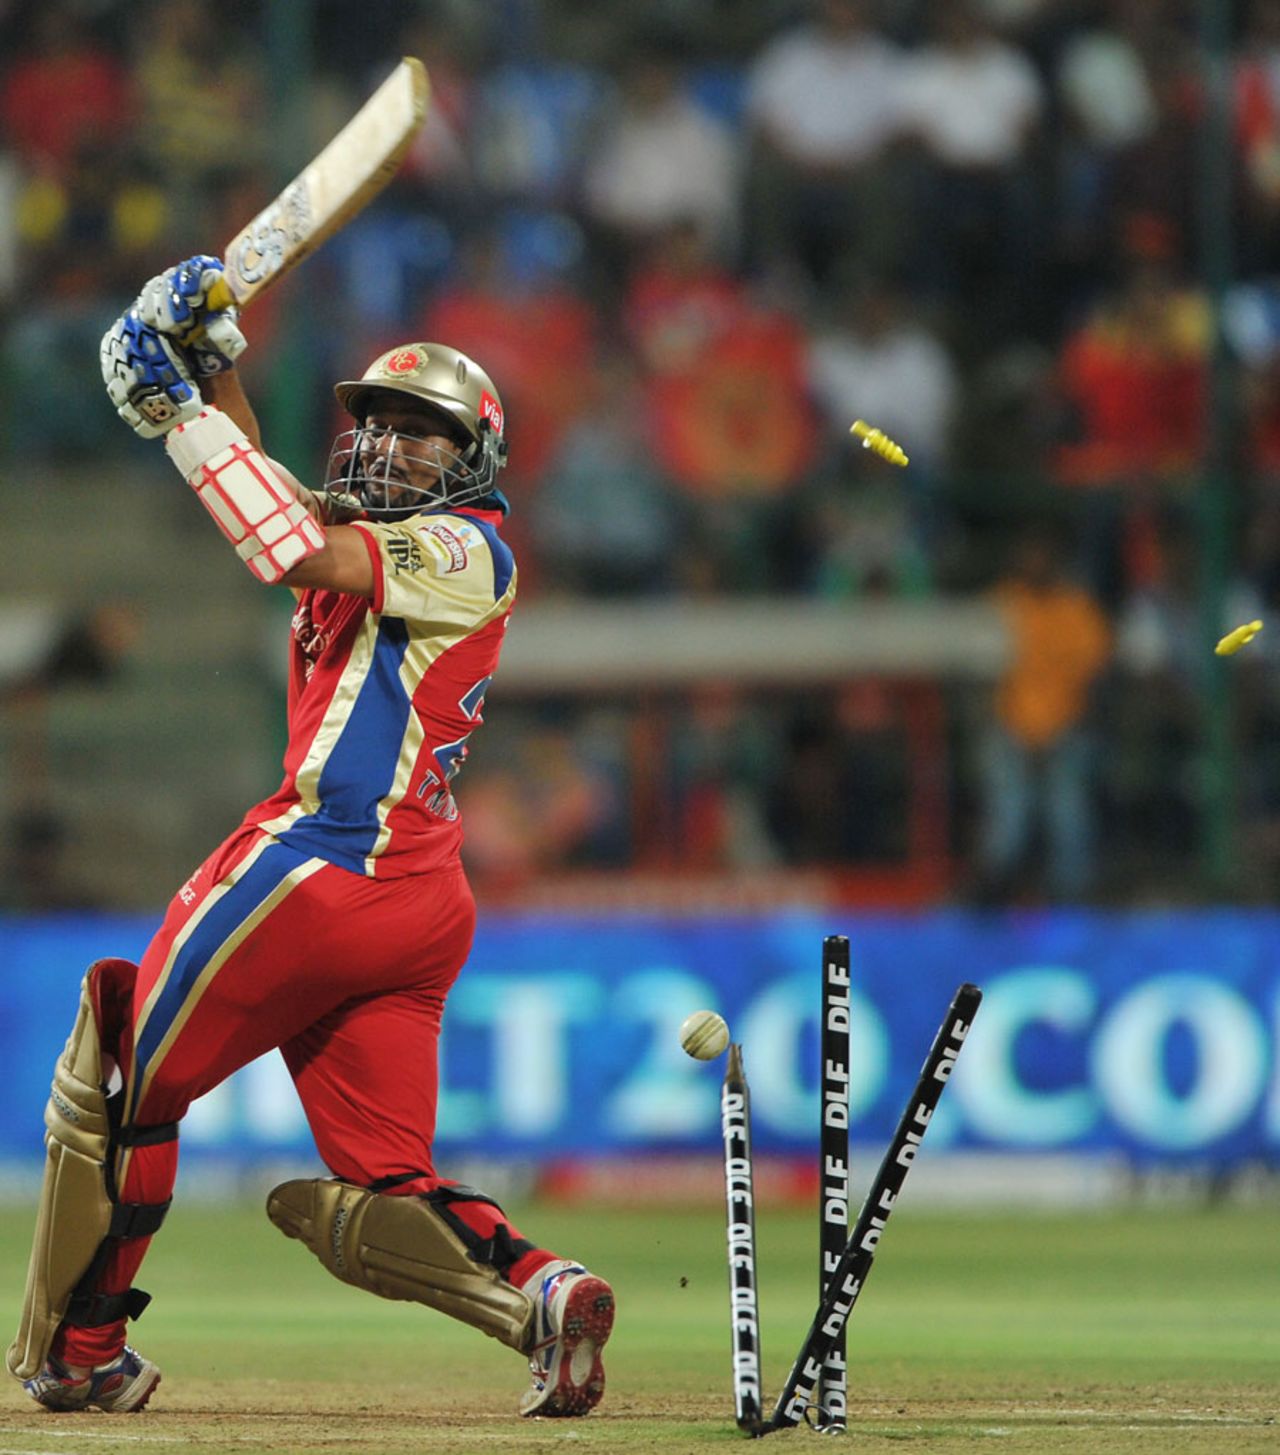 Tillakaratne Dilshan is bowled, Royal Challengers Bangalore v Deccan Chargers, IPL 2012, May 6, 2012